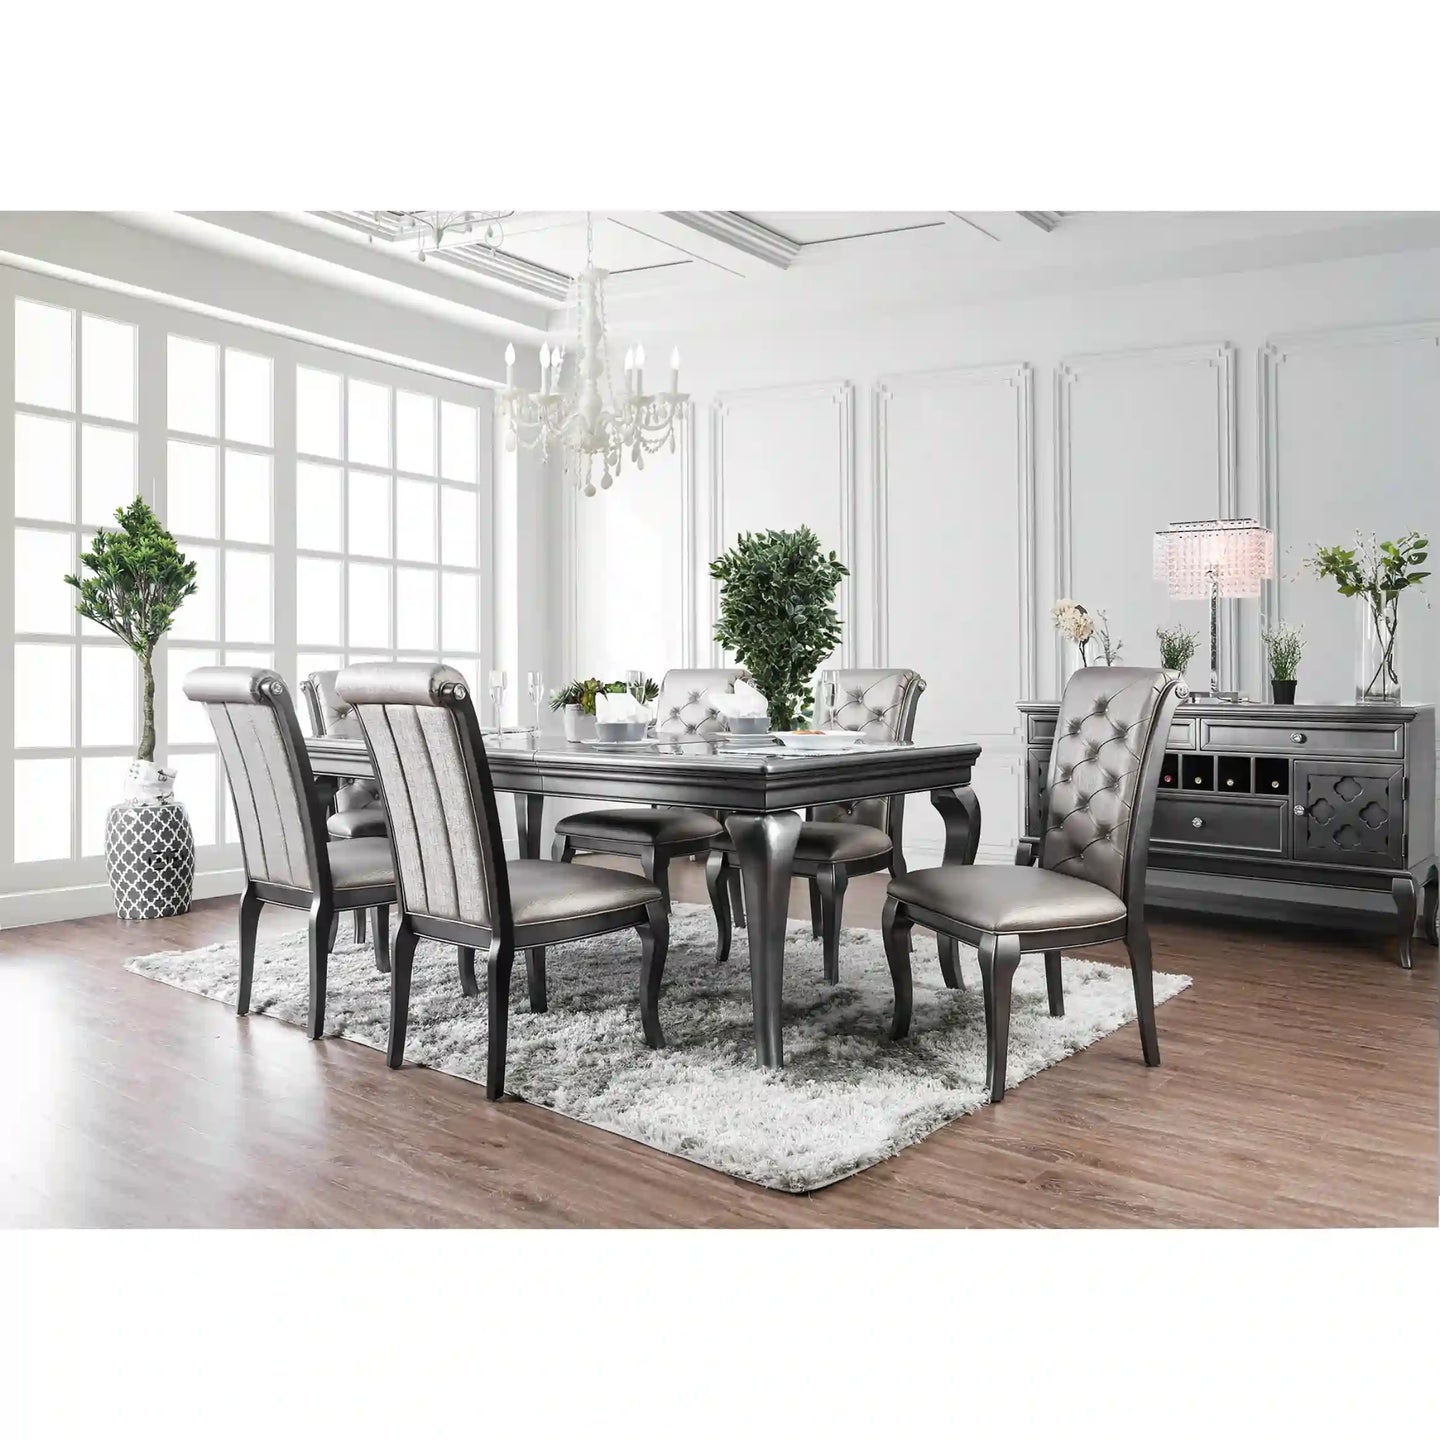 Furniture of America Polara Traditional Extendable Dining Table - IDF-3219GY-T